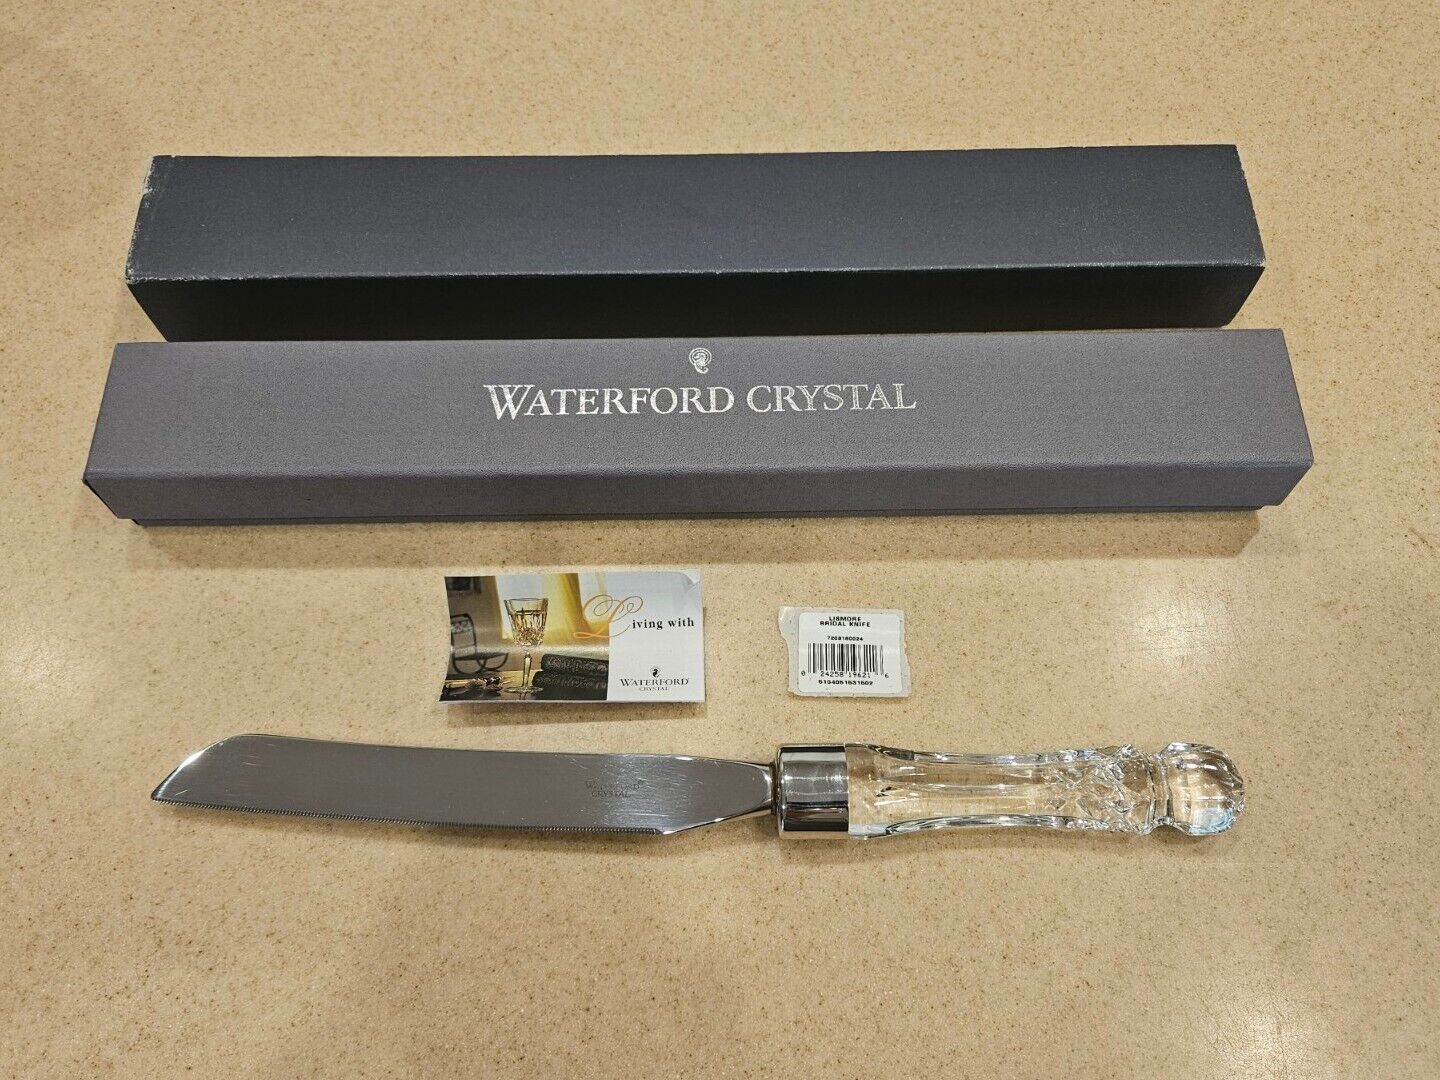 RARE WATERFORD CRYSTAL LISMORE WEDDING CAKE PIE SERRATED SERVING SILVER KNIFE